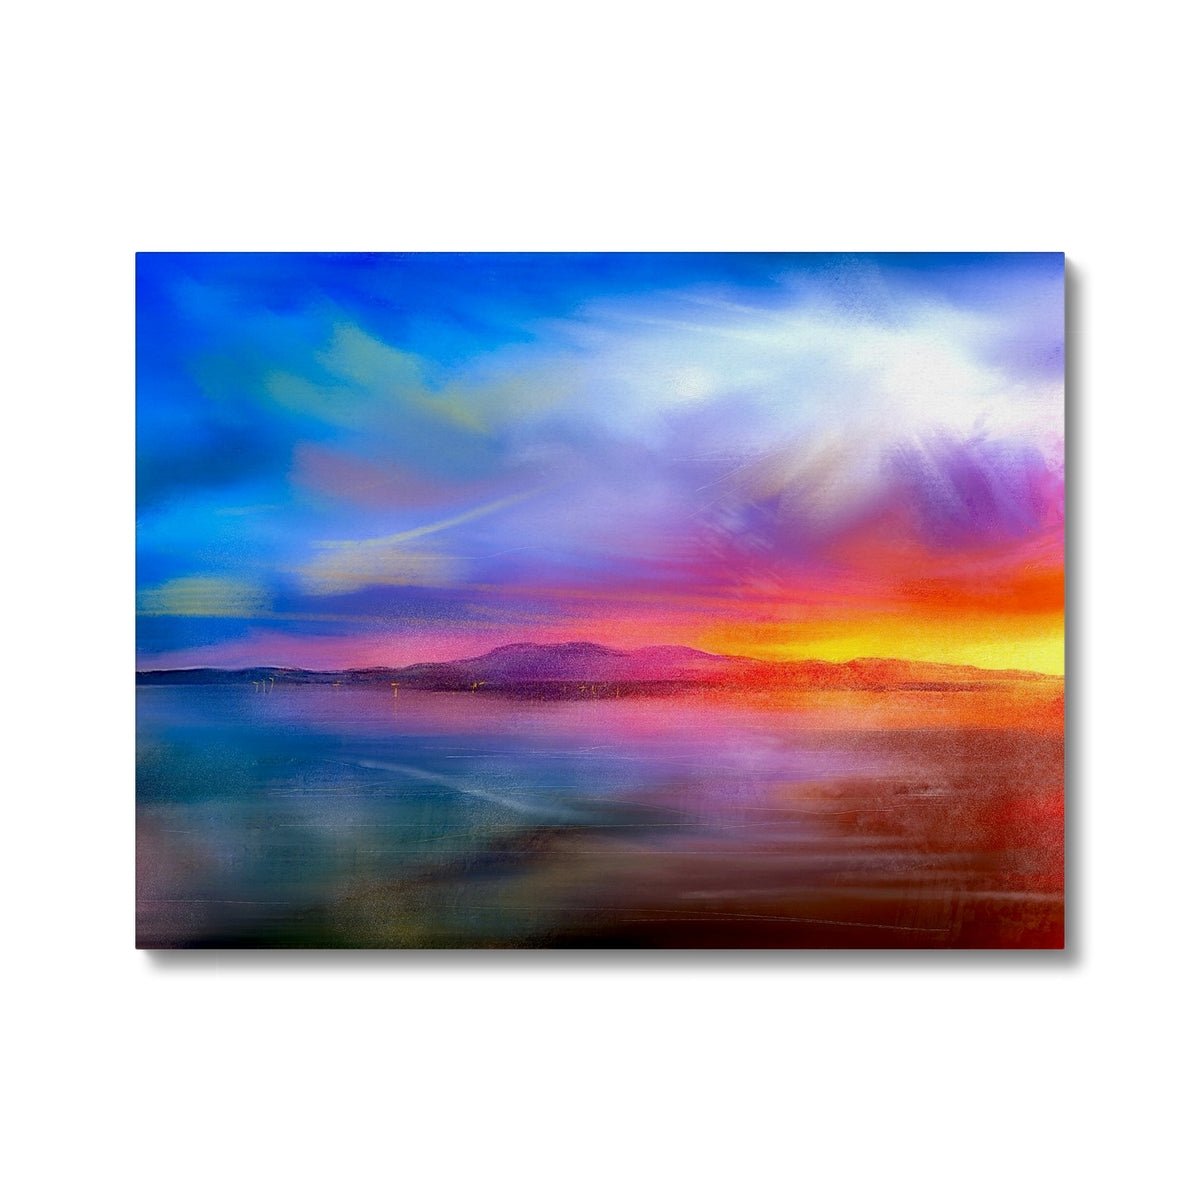 Arran Sunset Painting | Canvas From Scotland-Contemporary Stretched Canvas Prints-Arran Art Gallery-24"x18"-Paintings, Prints, Homeware, Art Gifts From Scotland By Scottish Artist Kevin Hunter